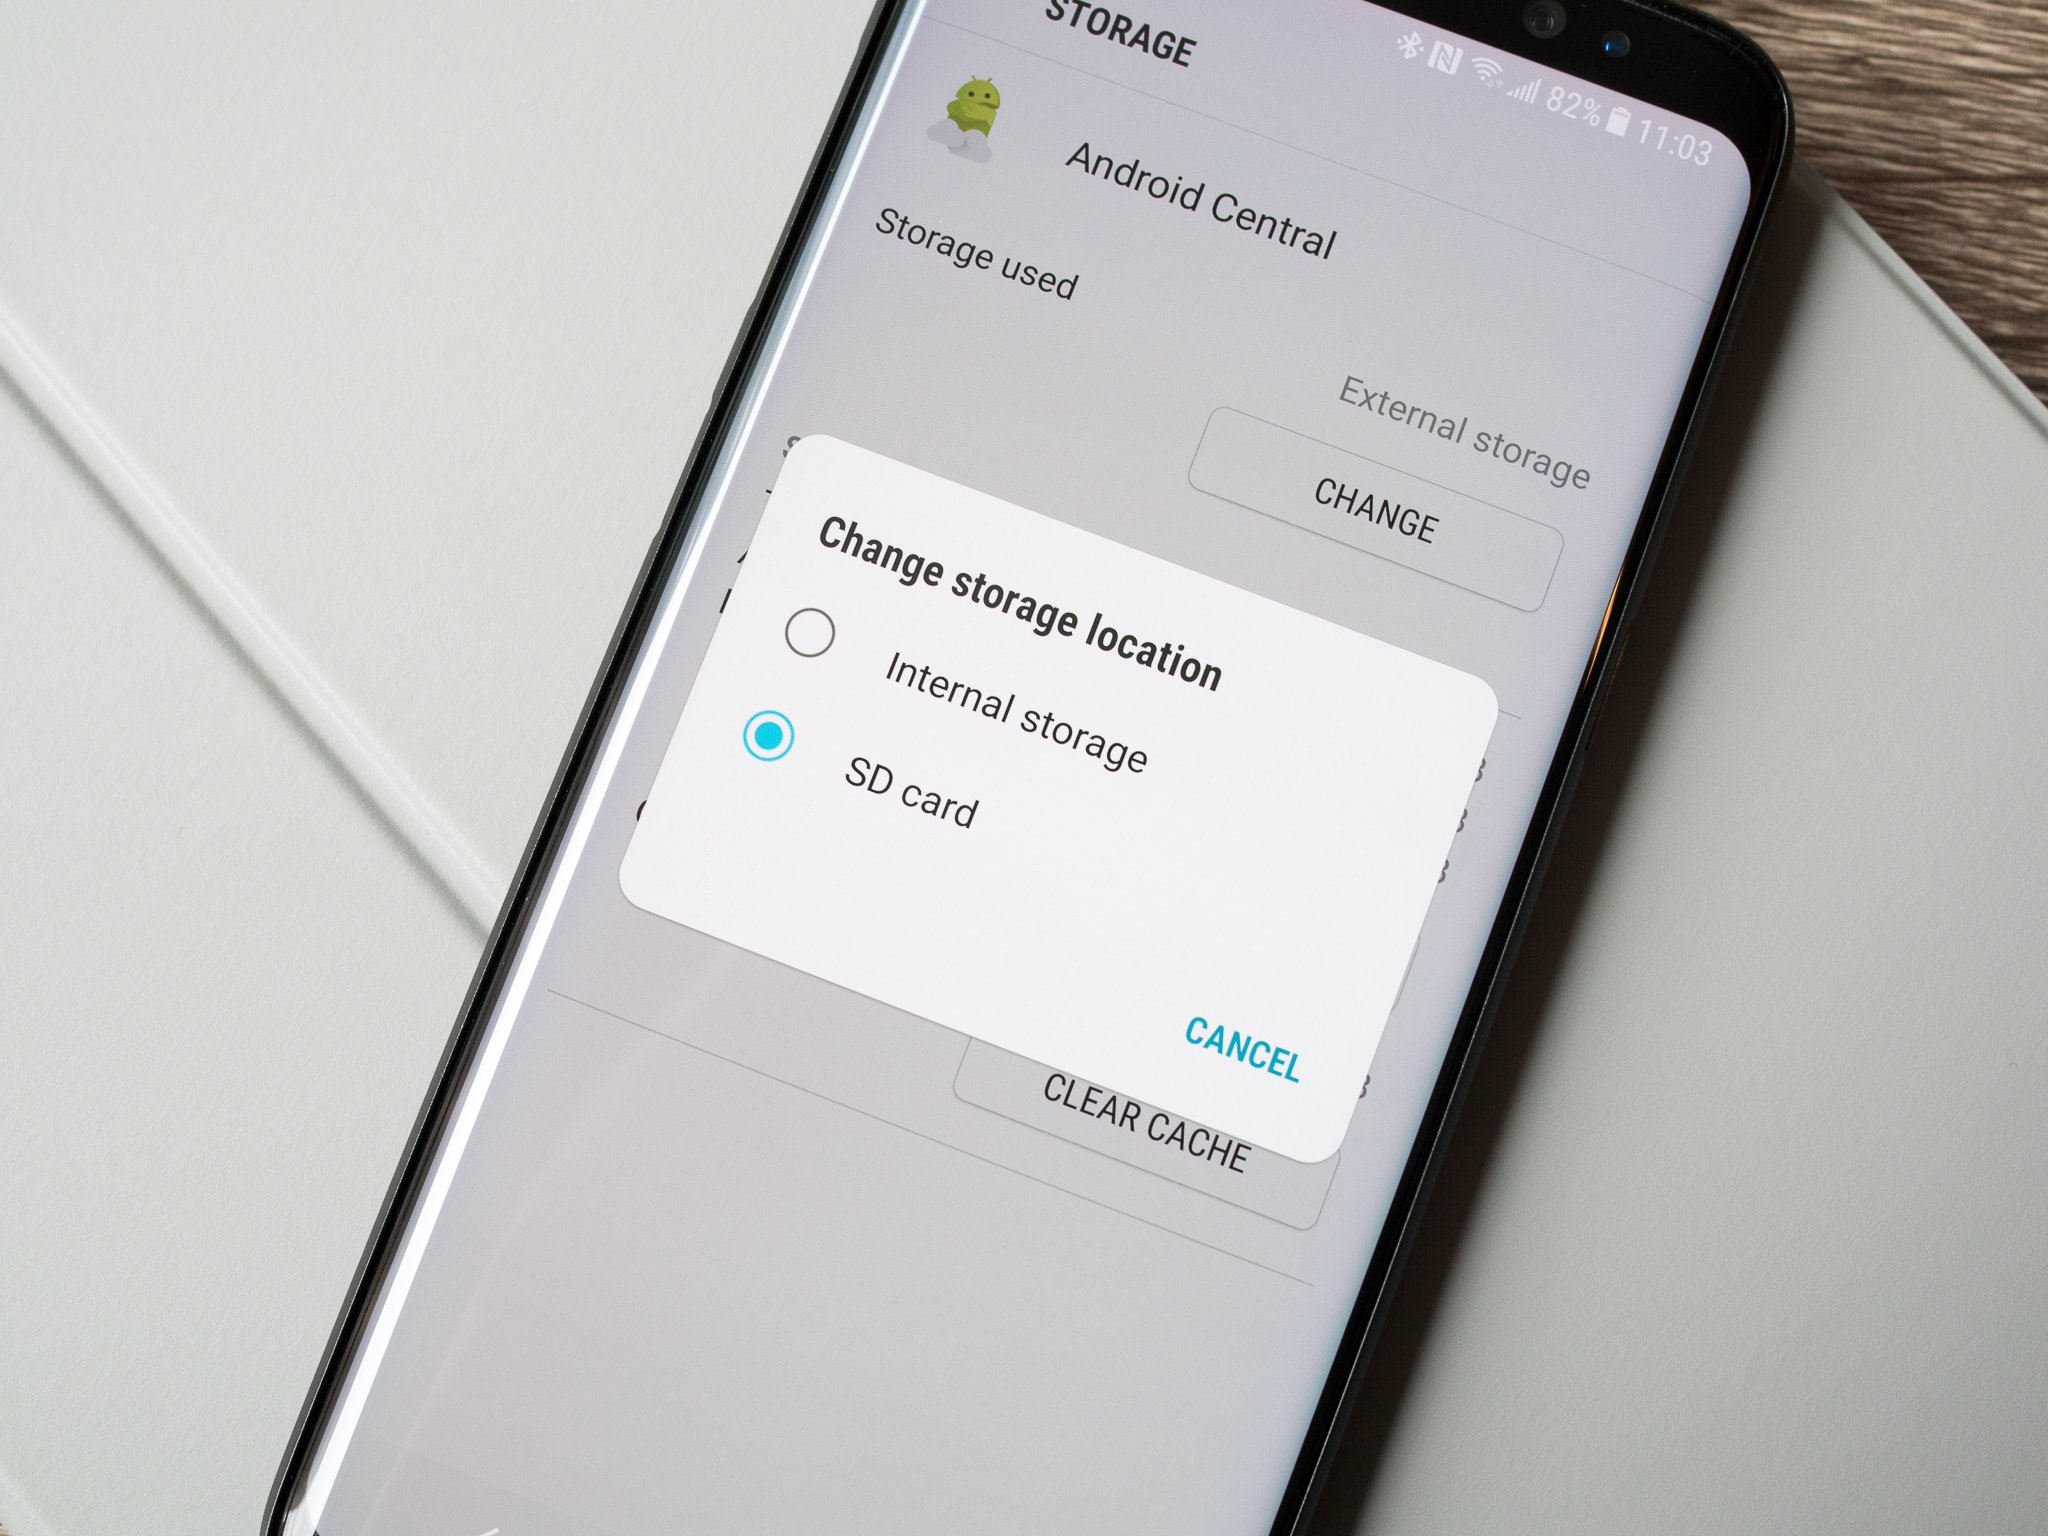 How To Move Apps To Your Sd Card On The Galaxy S8 Android Central